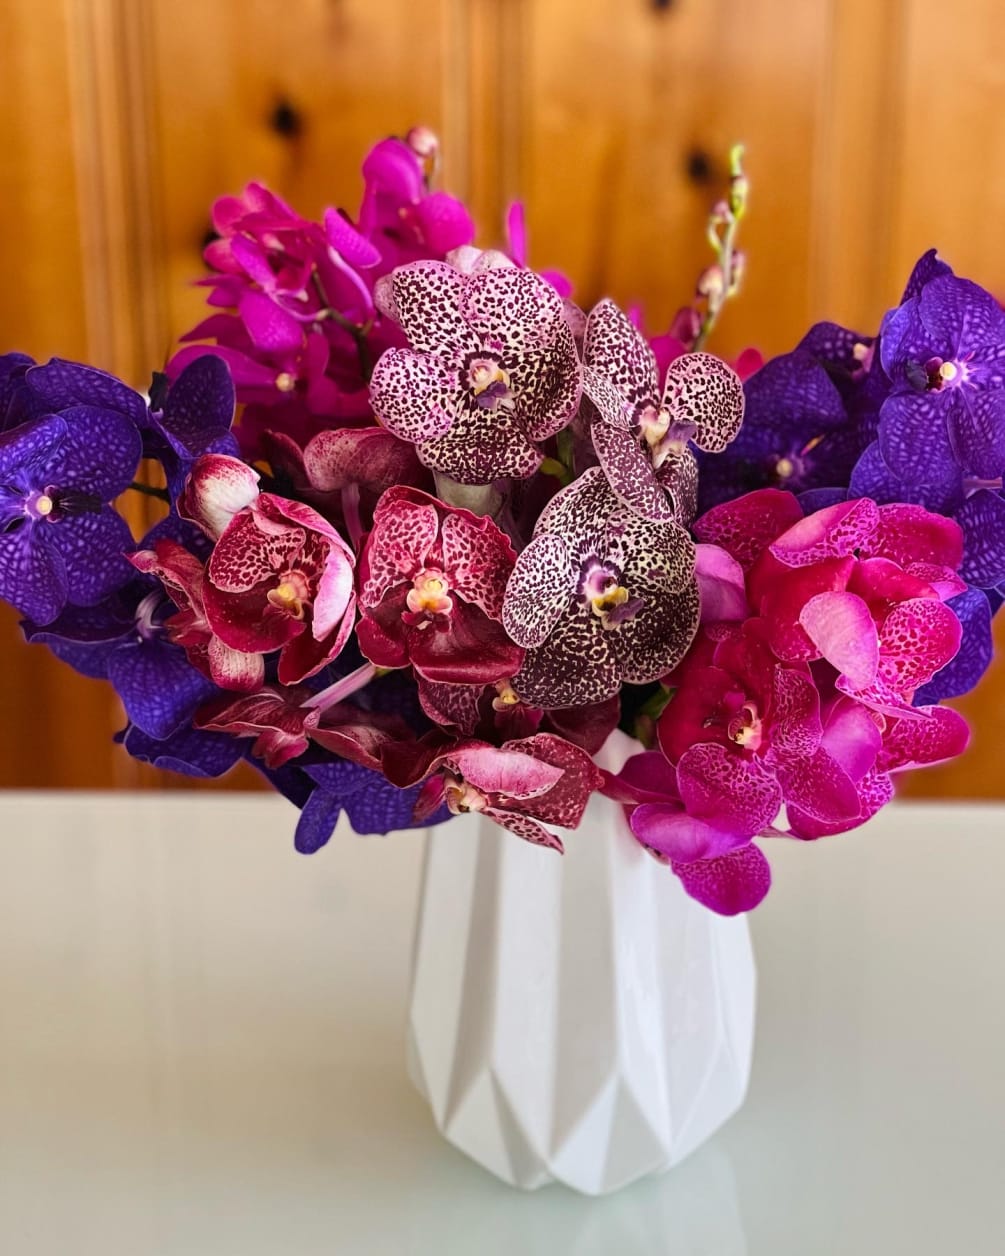 A stunning arrangement of Vanda Orchids in pinks and purples. Perfect for